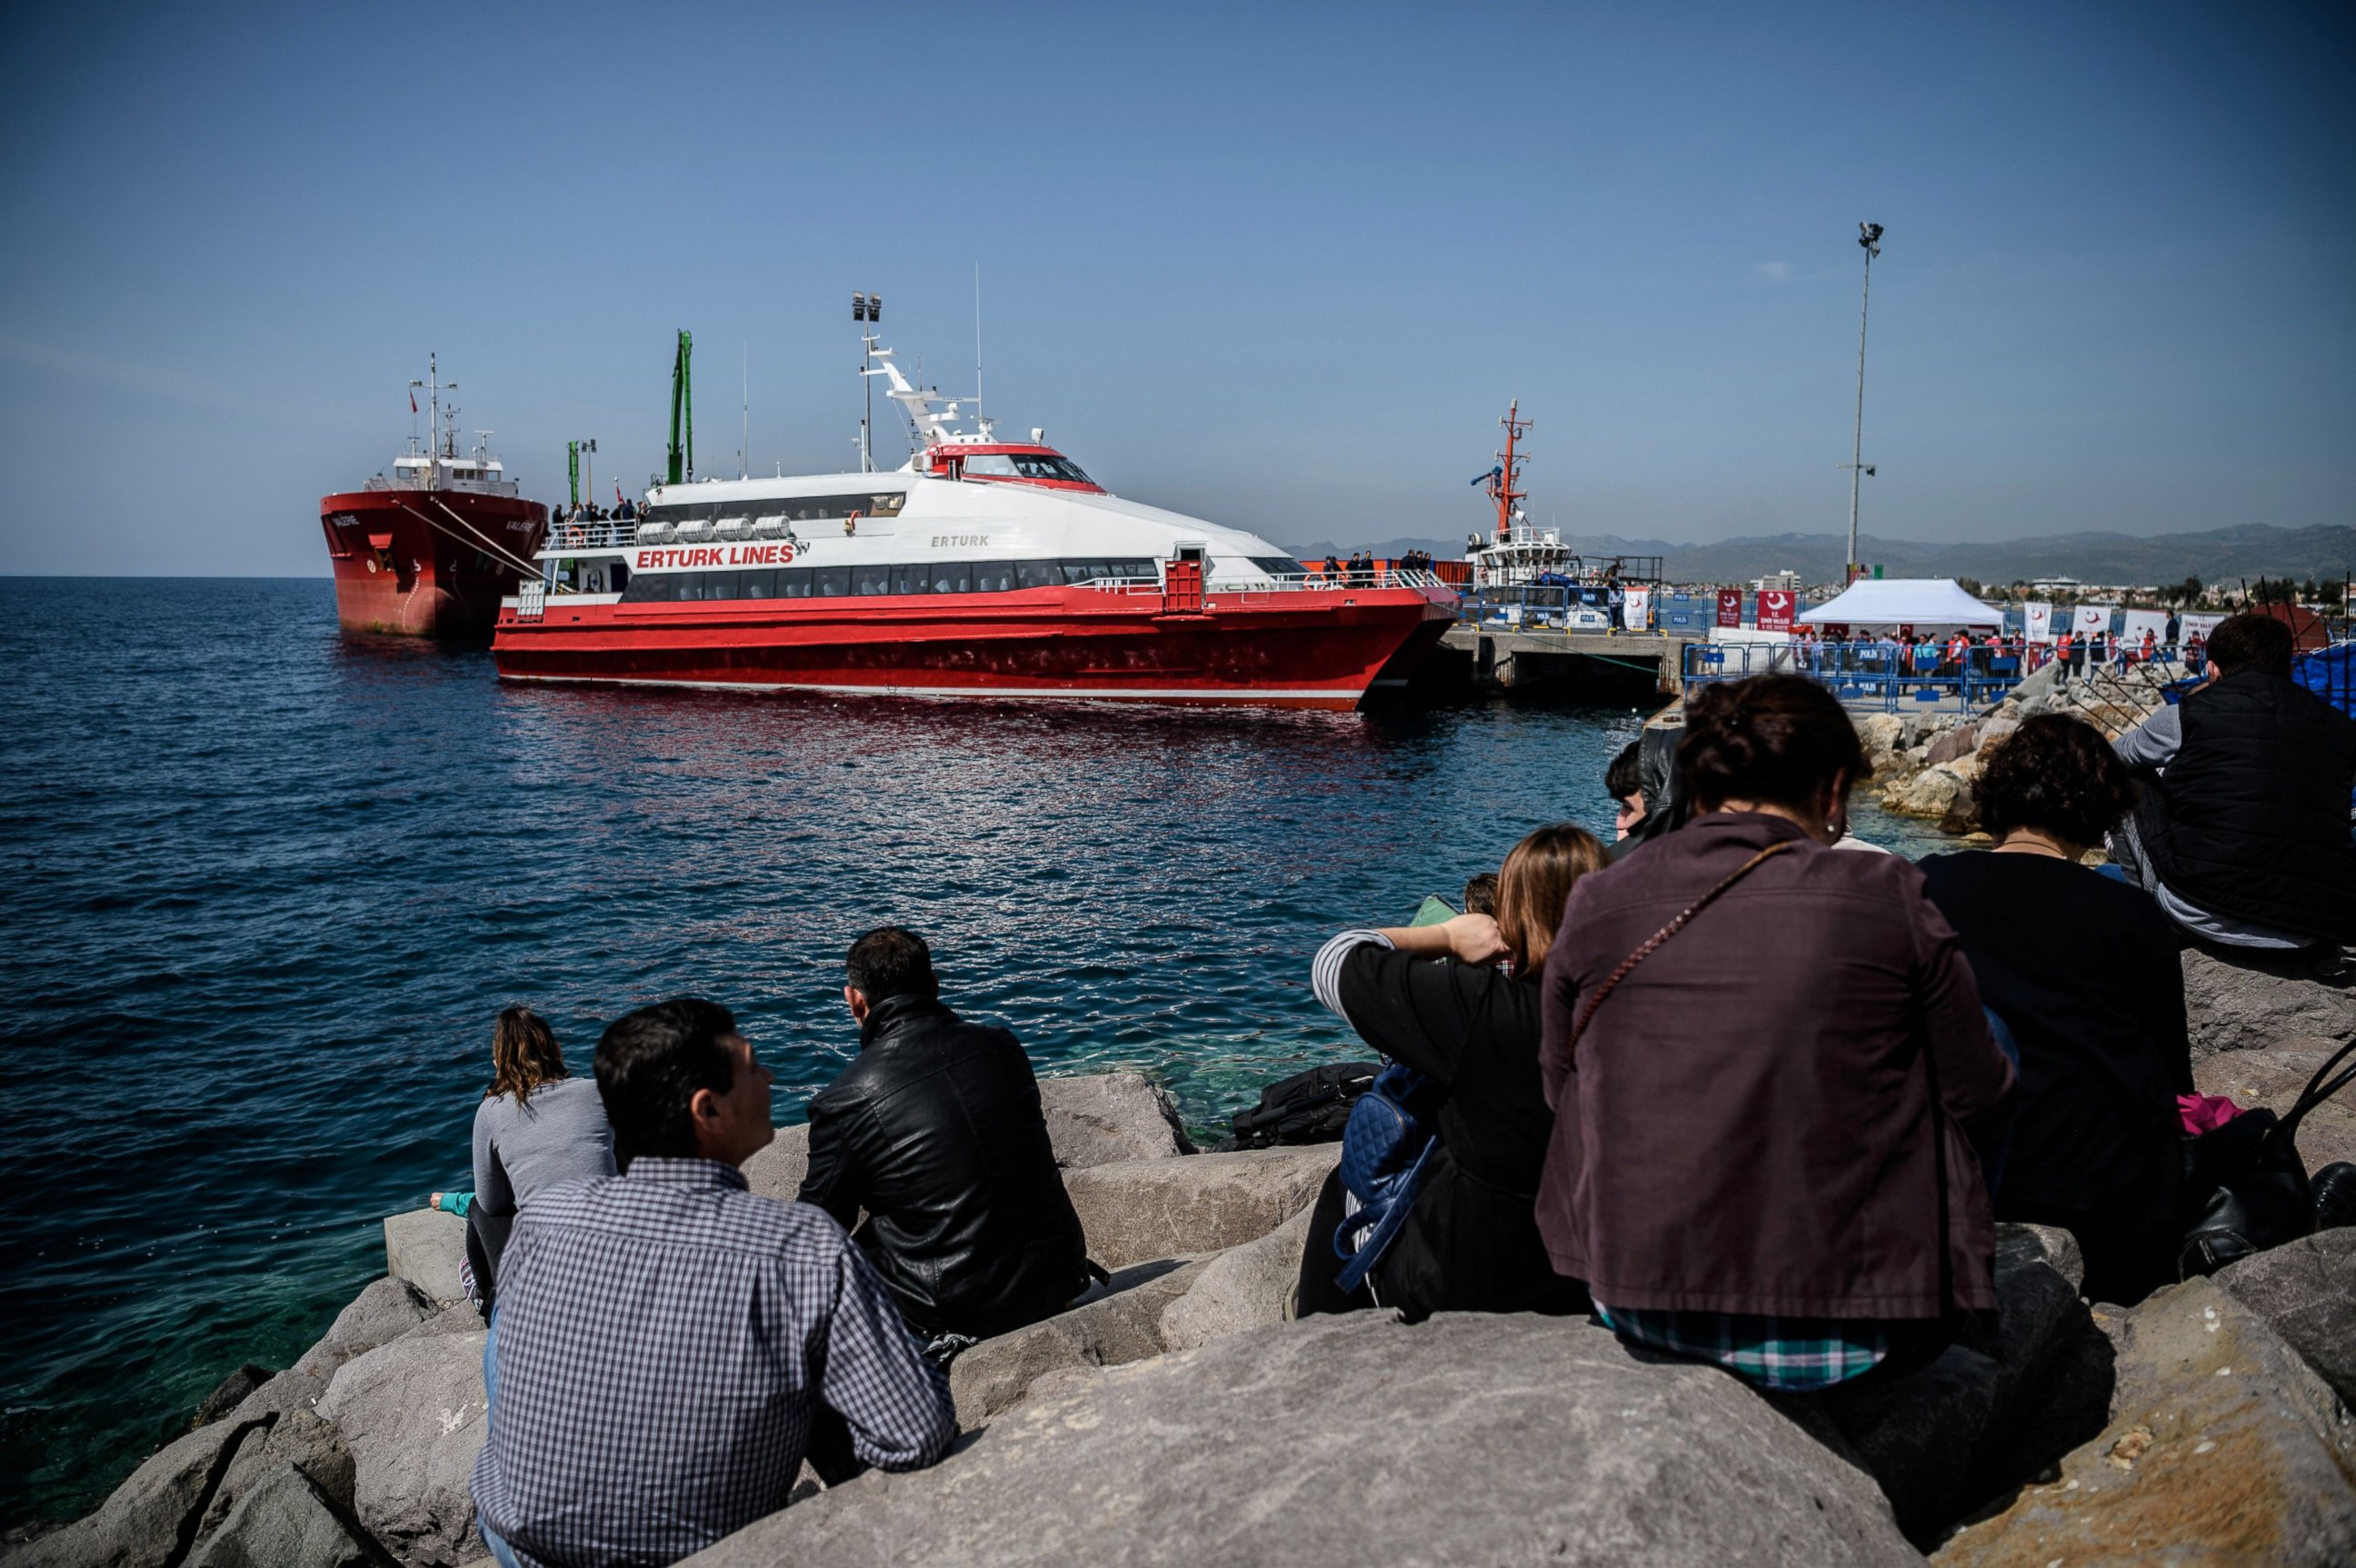 PHOTO: People gather on the beach as migrants deported from Greece arrive aboard a small Turkish ferry in the port of Dikili district in Izmir, Turkey, on April 4, 2016.  